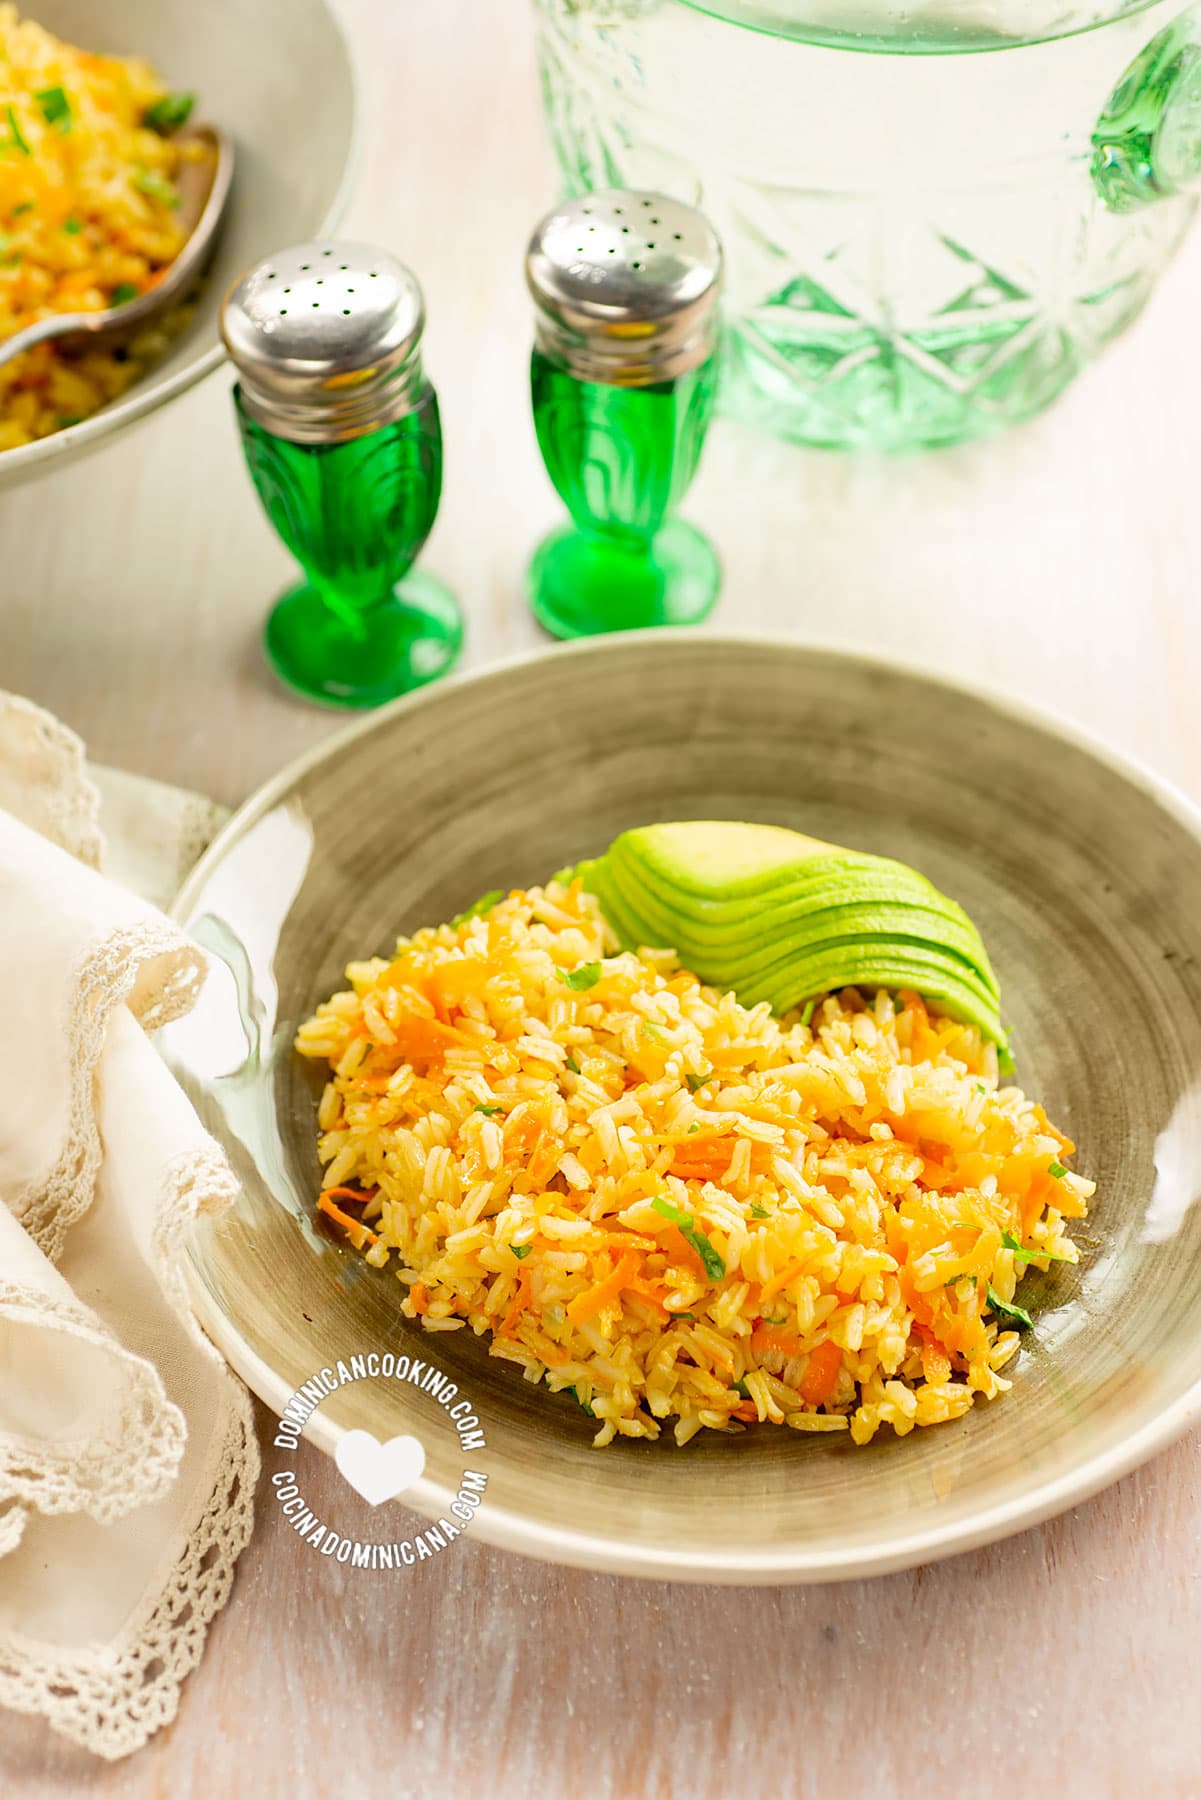 Arroz Amarillo Served with Avocado (Carrot and Onions Yellow Rice)